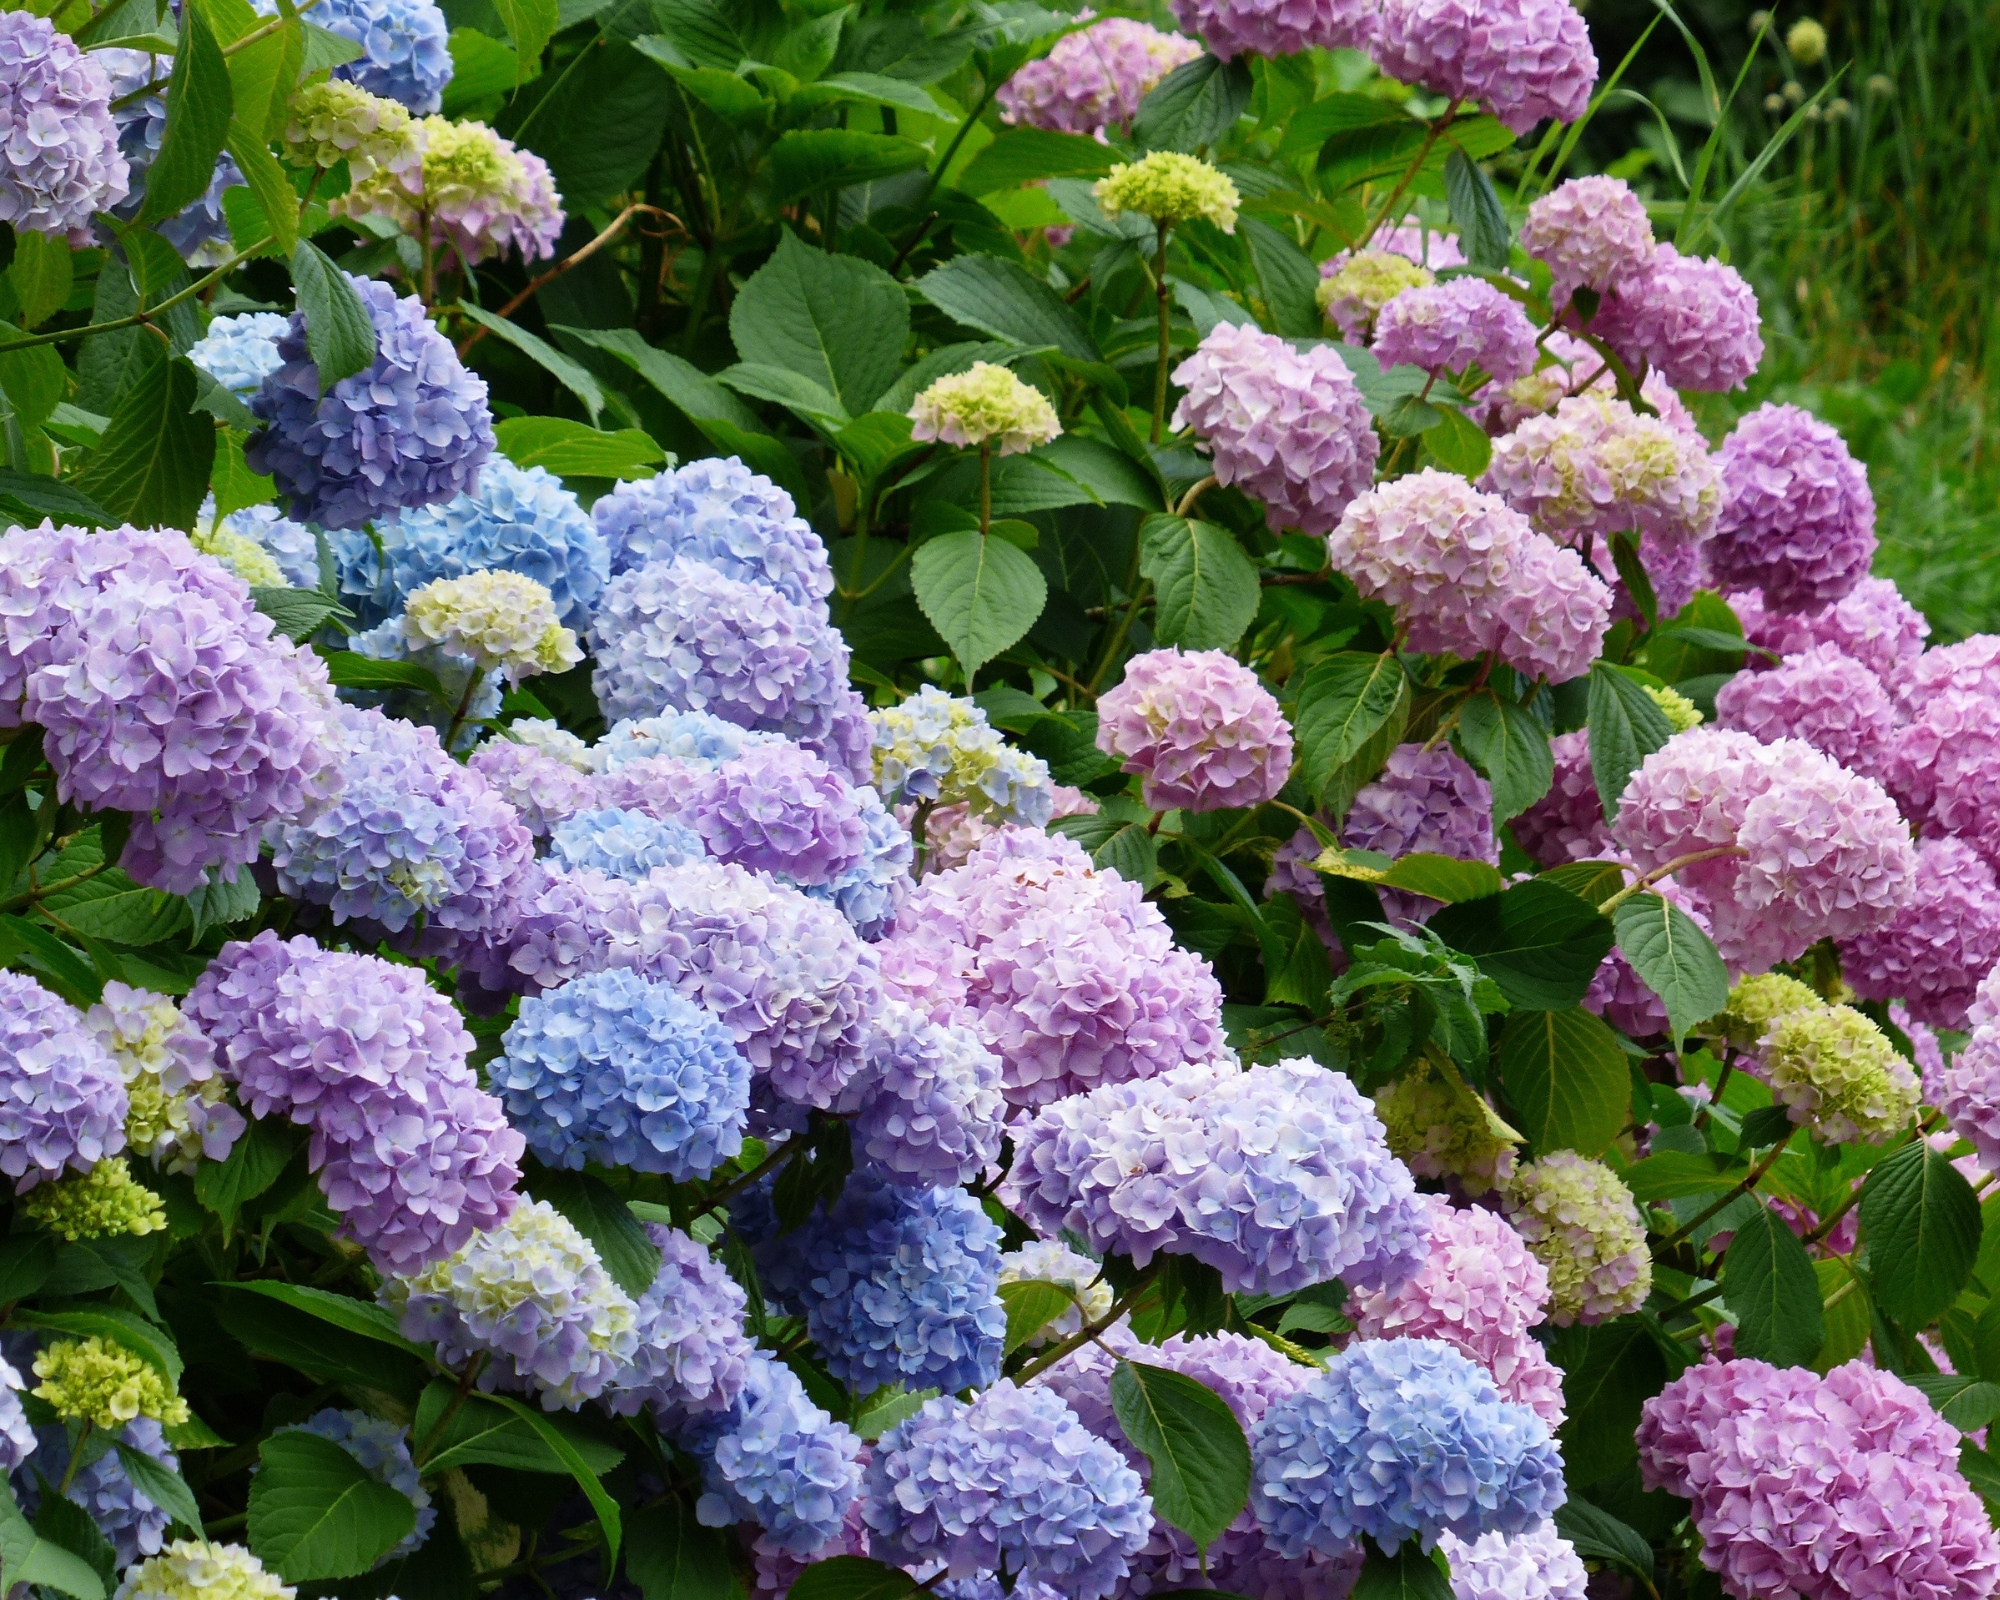 can hydrangeas grow in pots? gardeners dish on the best environment for these stunning blooms